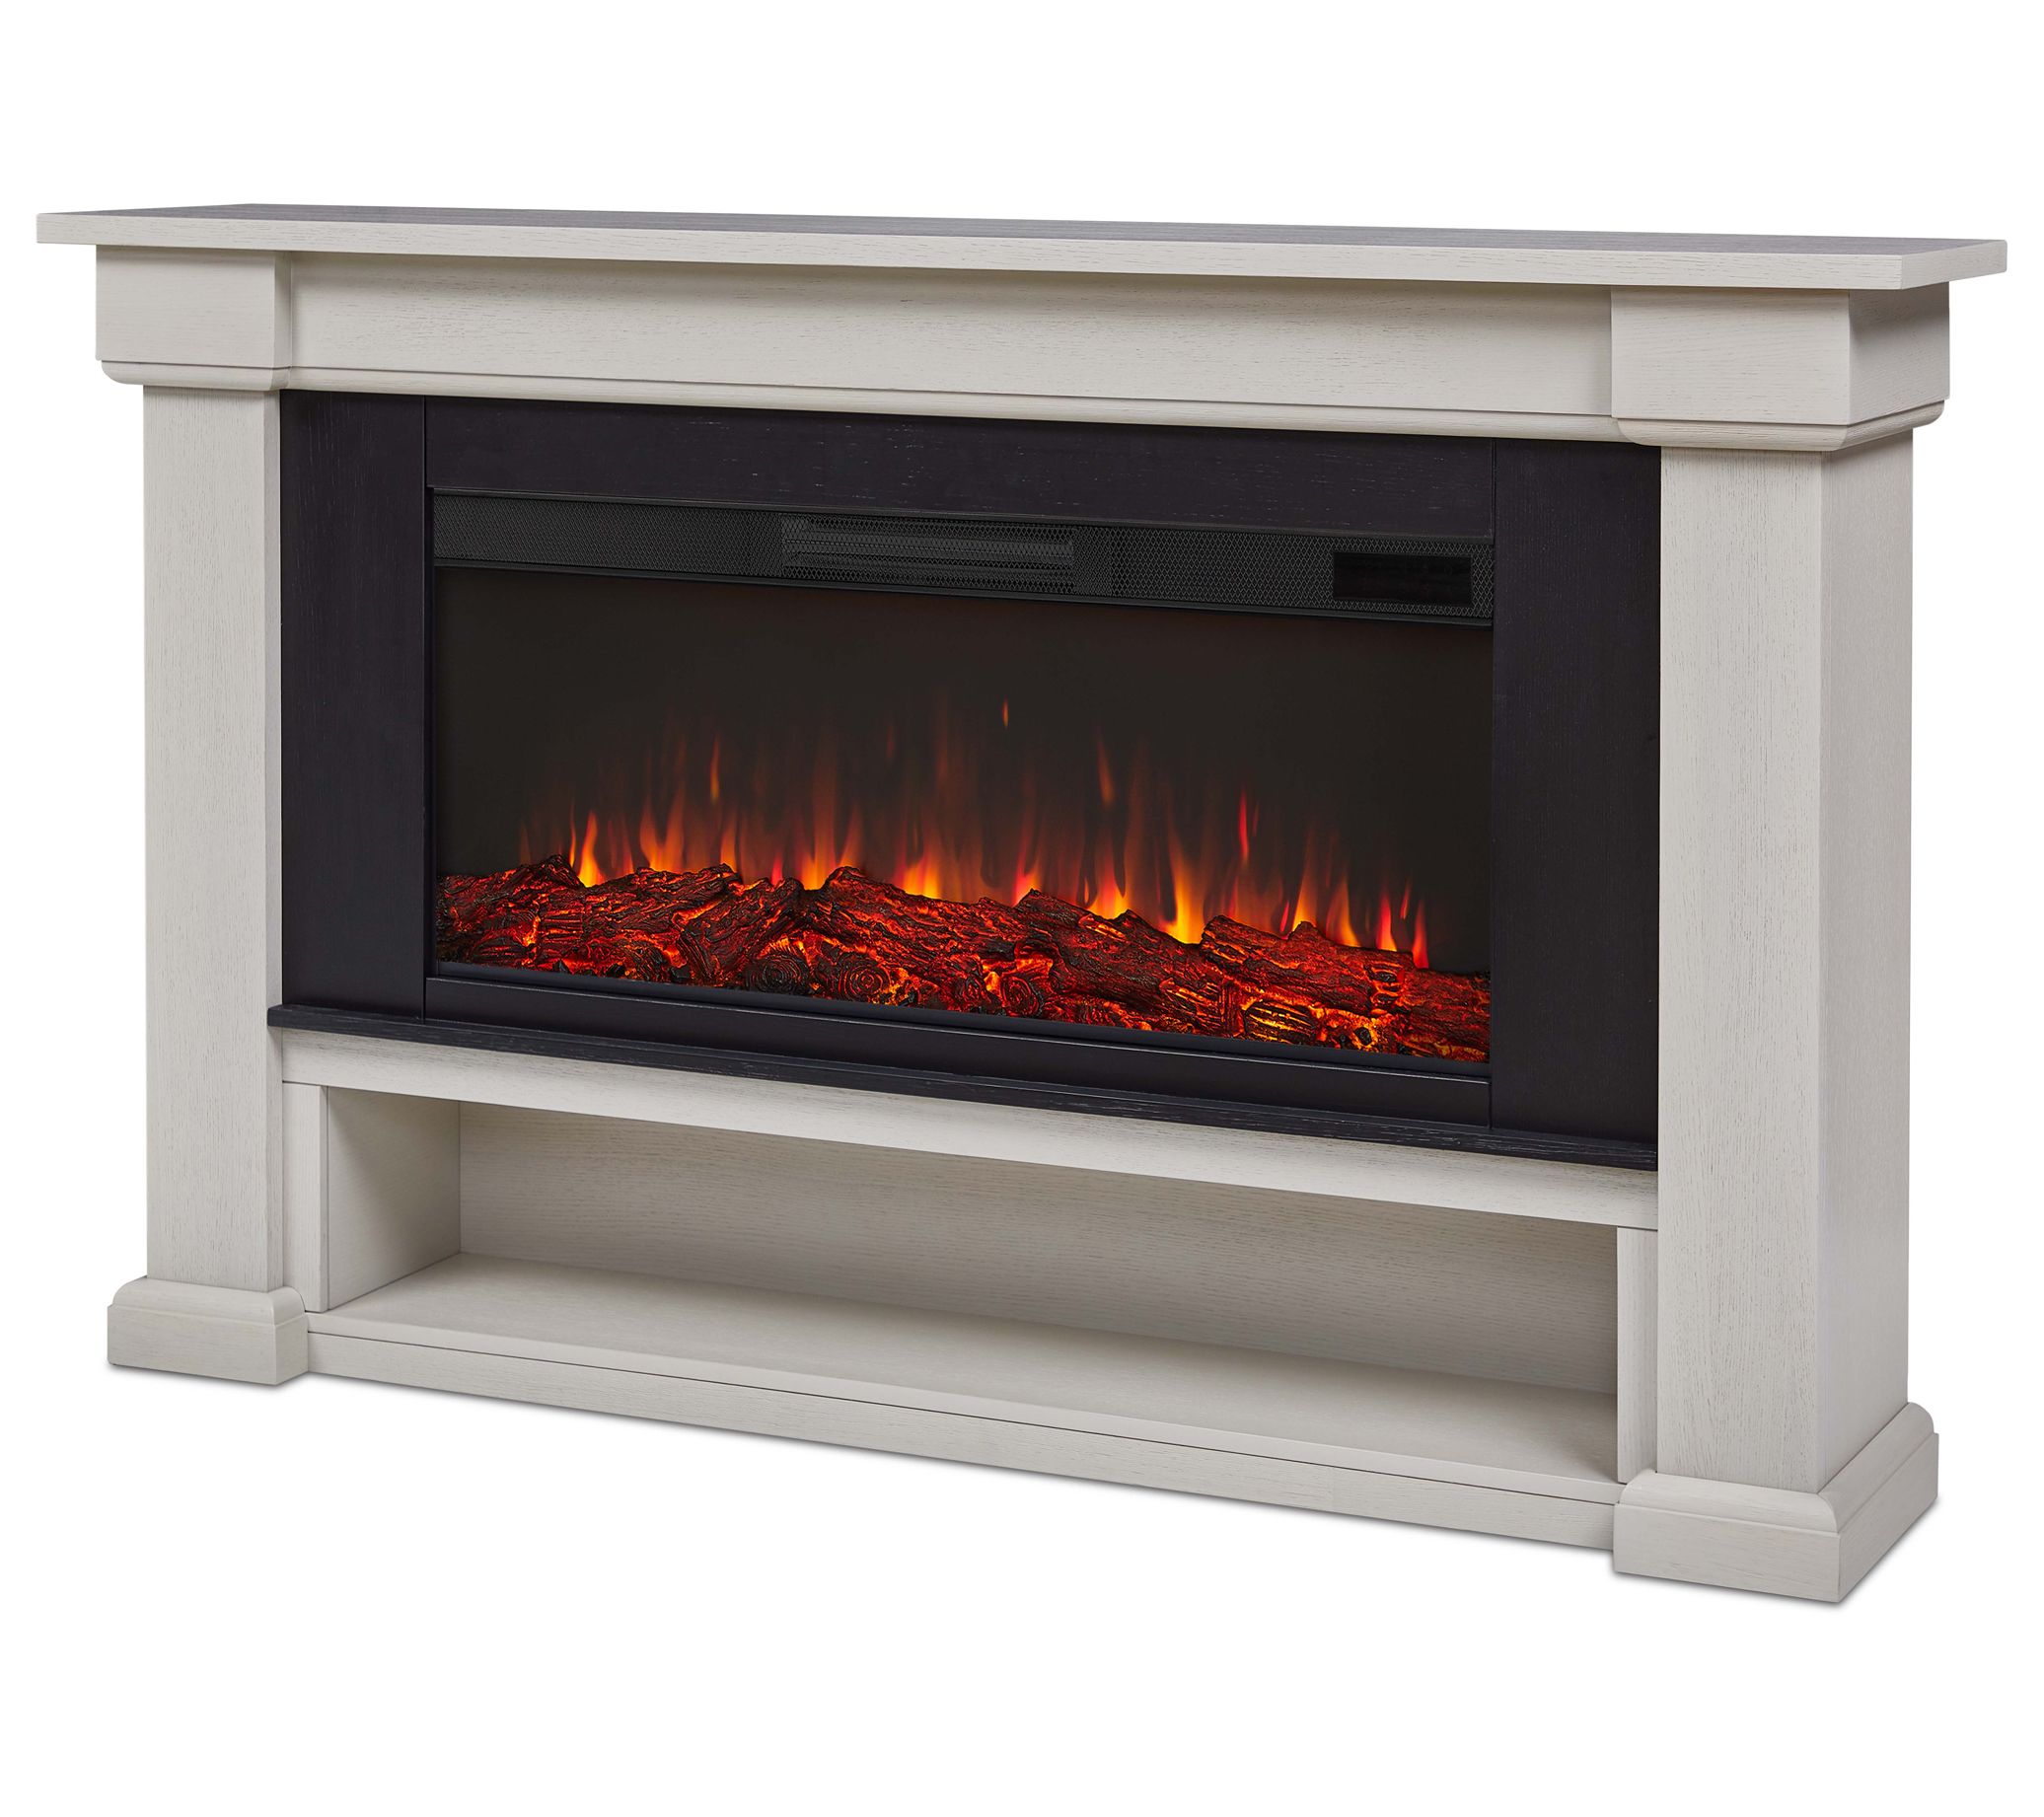 Real Flame Bristow Landscape Electric Fireplace - QVC.com